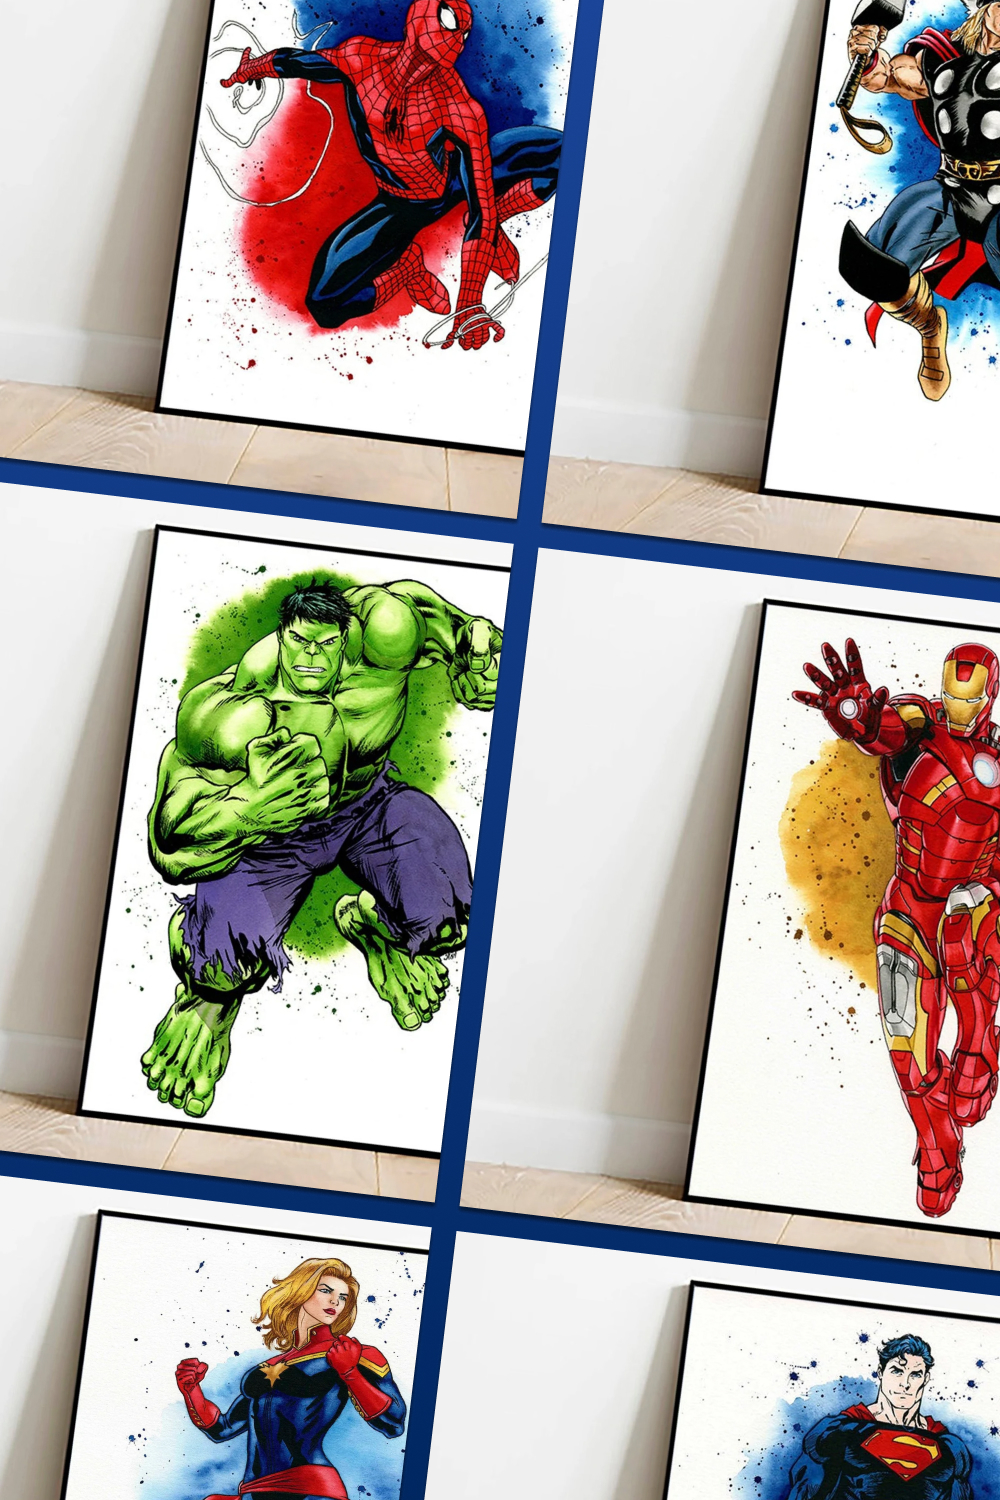 Cool images with hulk, iron man and niche.